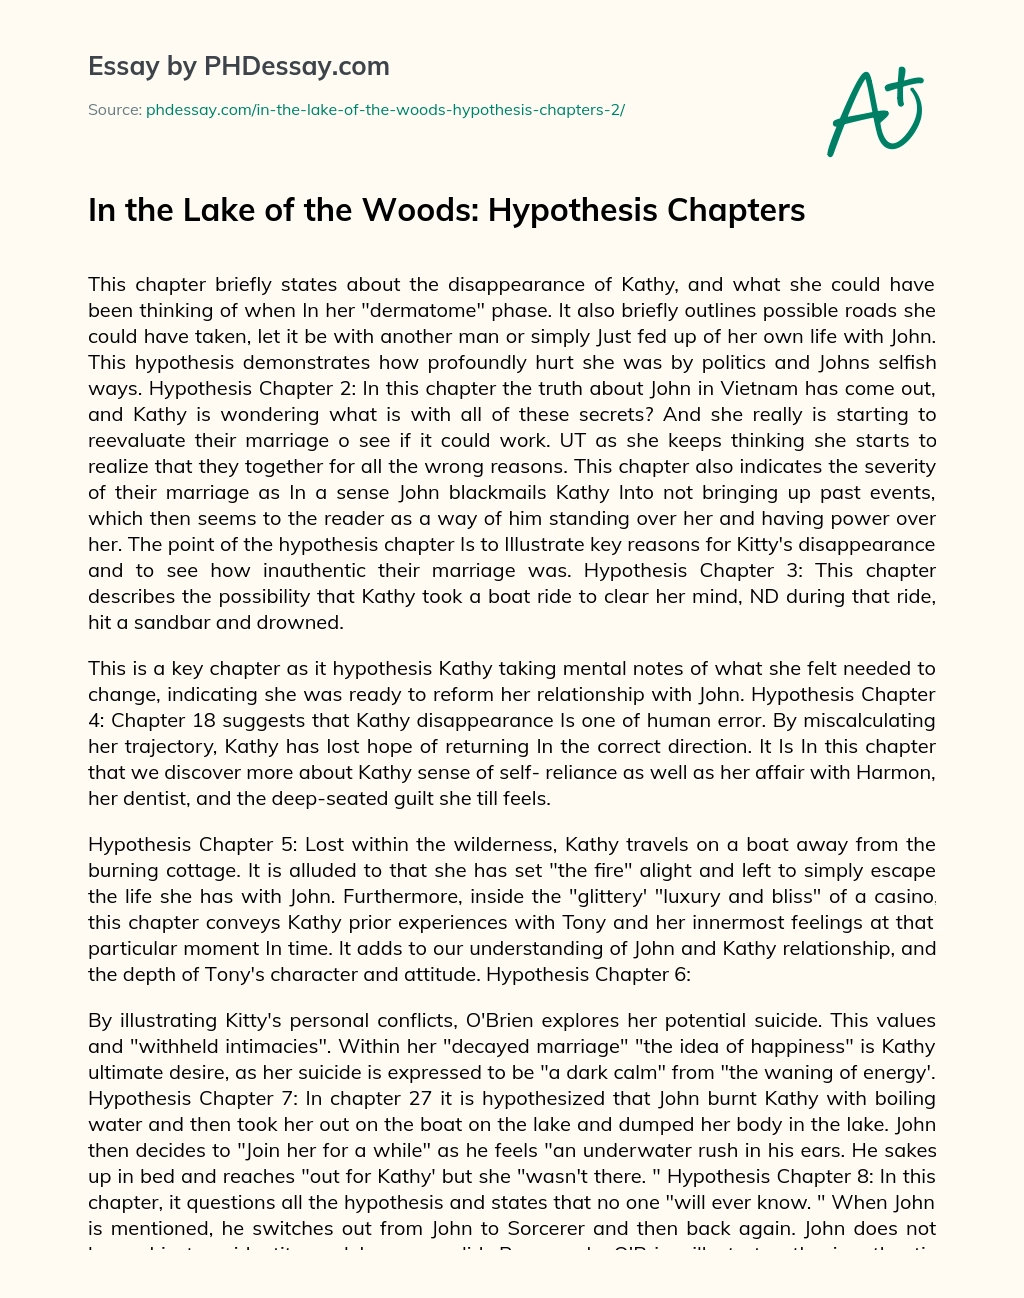 In the Lake of the Woods: Hypothesis Chapters essay